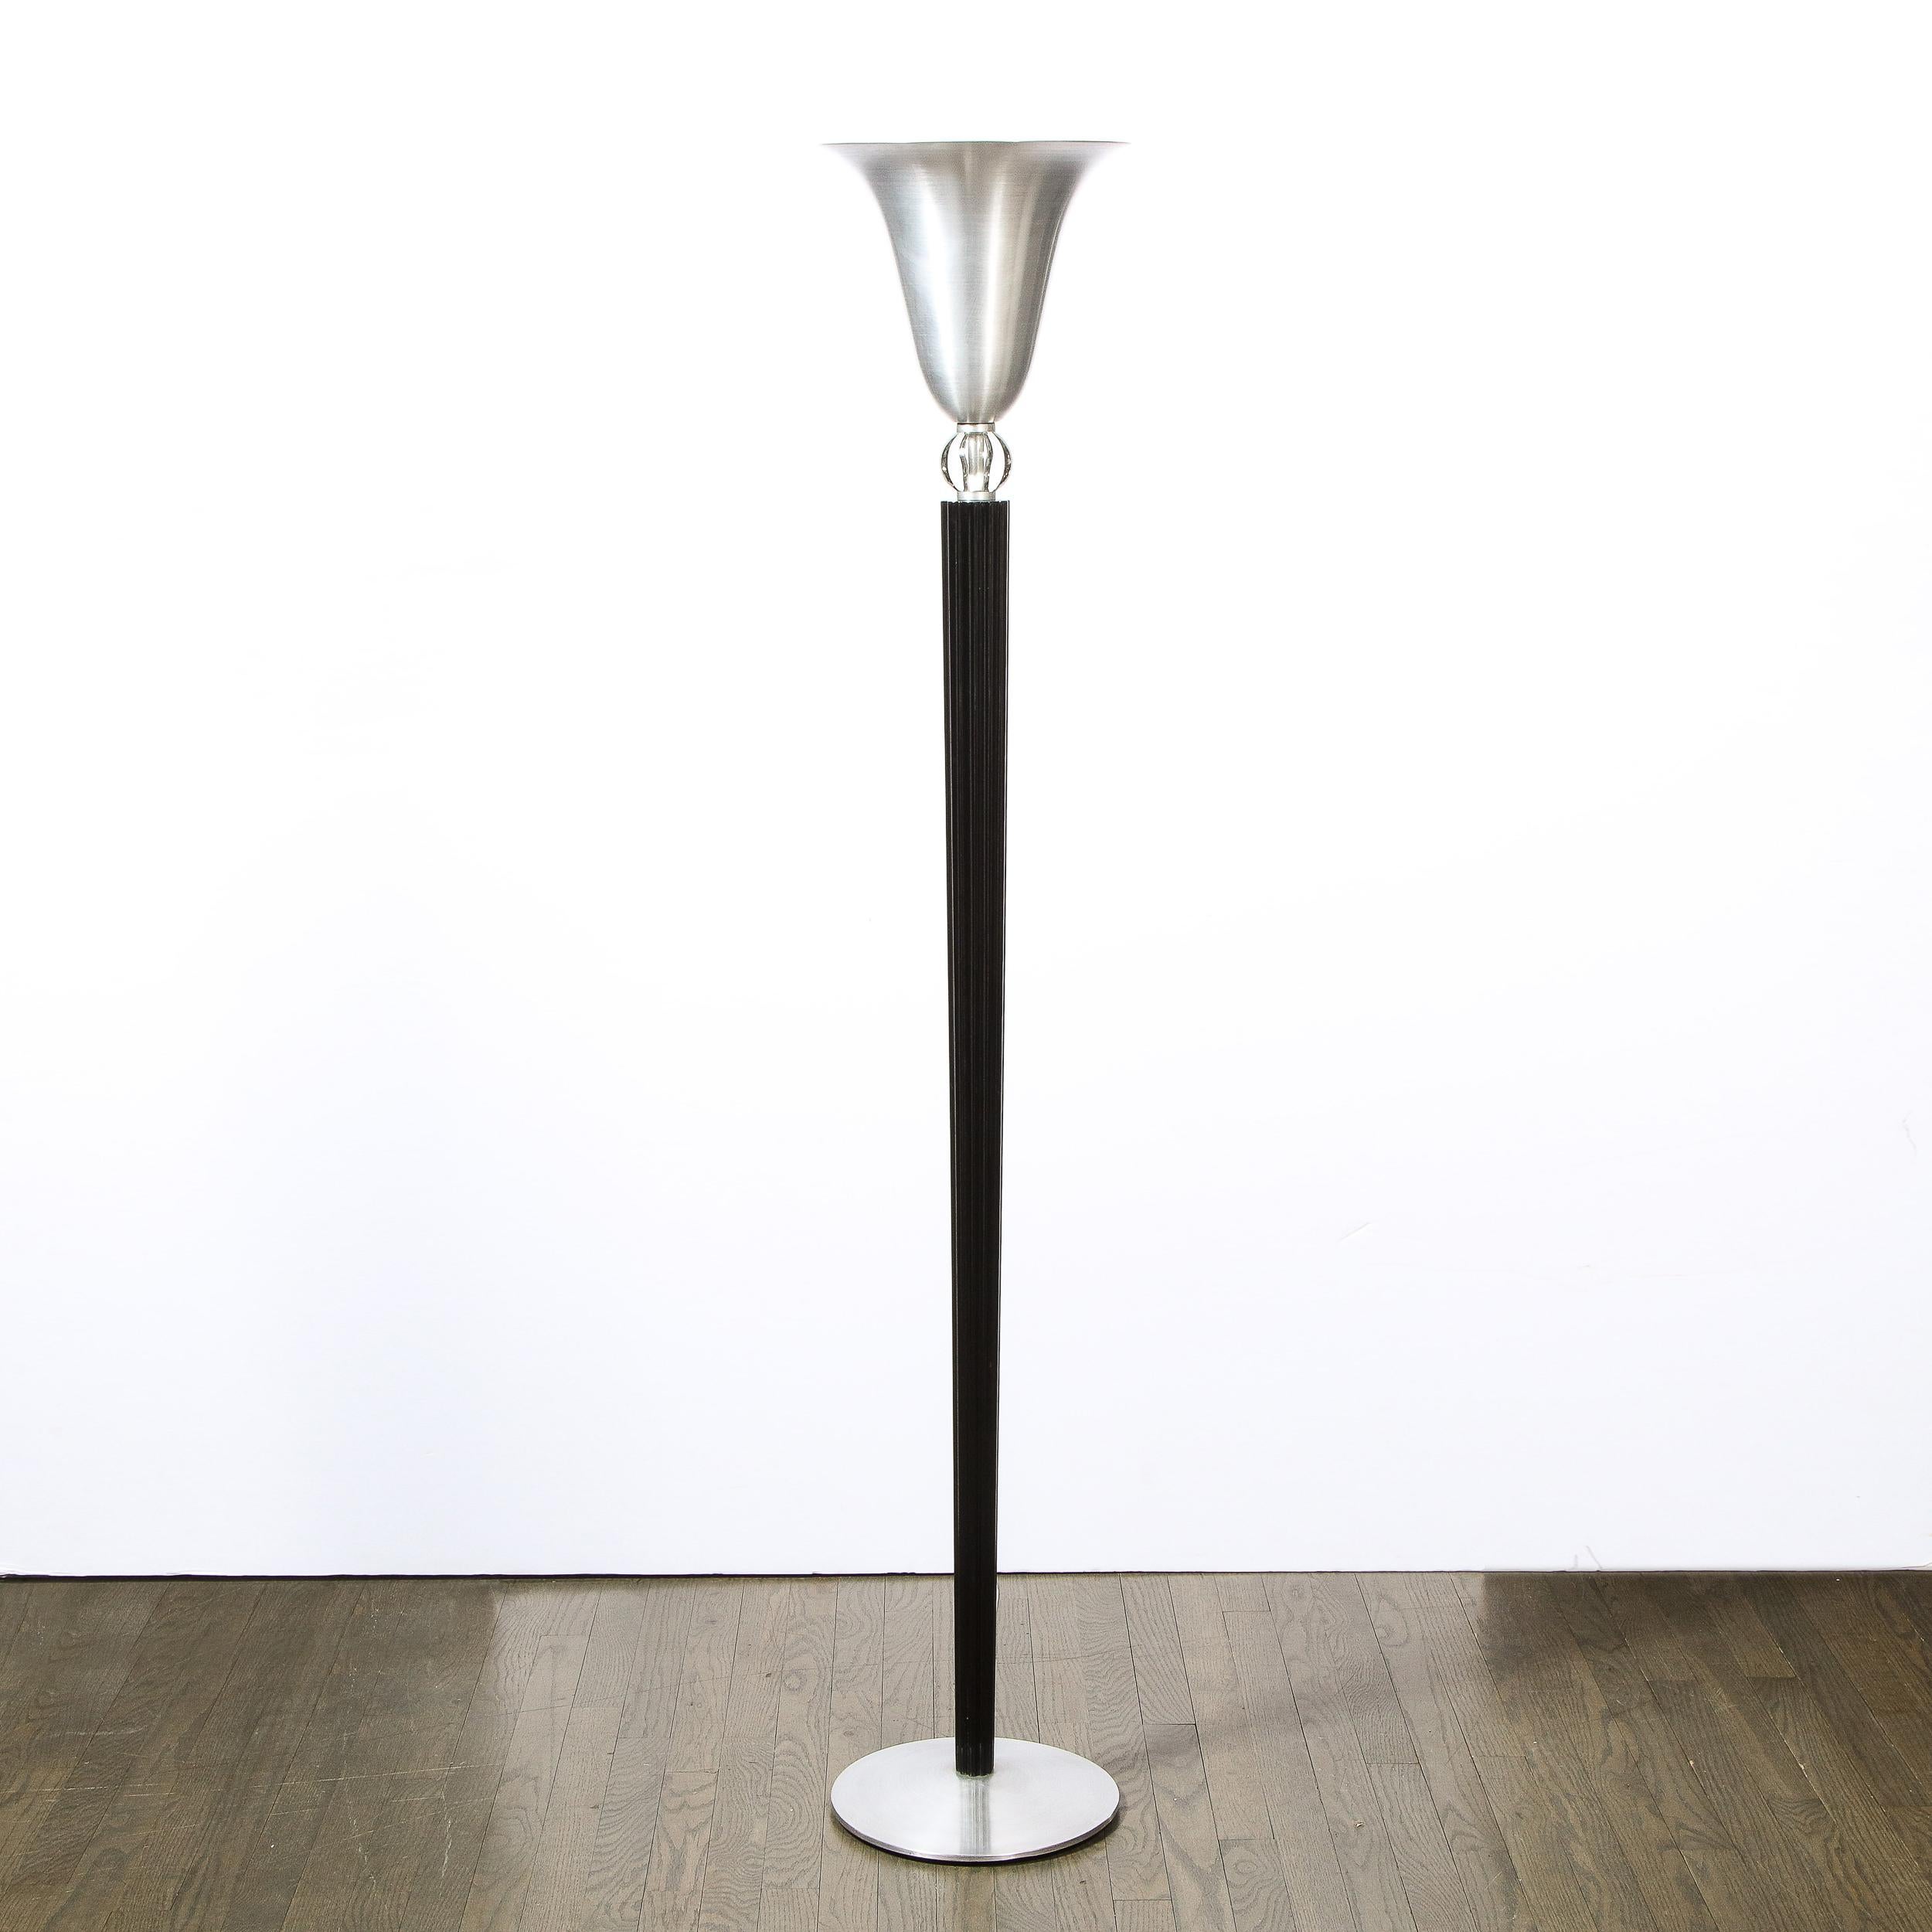 This refined Art Deco Machine Age floor lamp was realized by the legendary designer Russel Wright circa 1935. It offers a brushed aluminum circular base from which a channeled cylindrical black lacquer body ascends, flaring subtly to its apex. The